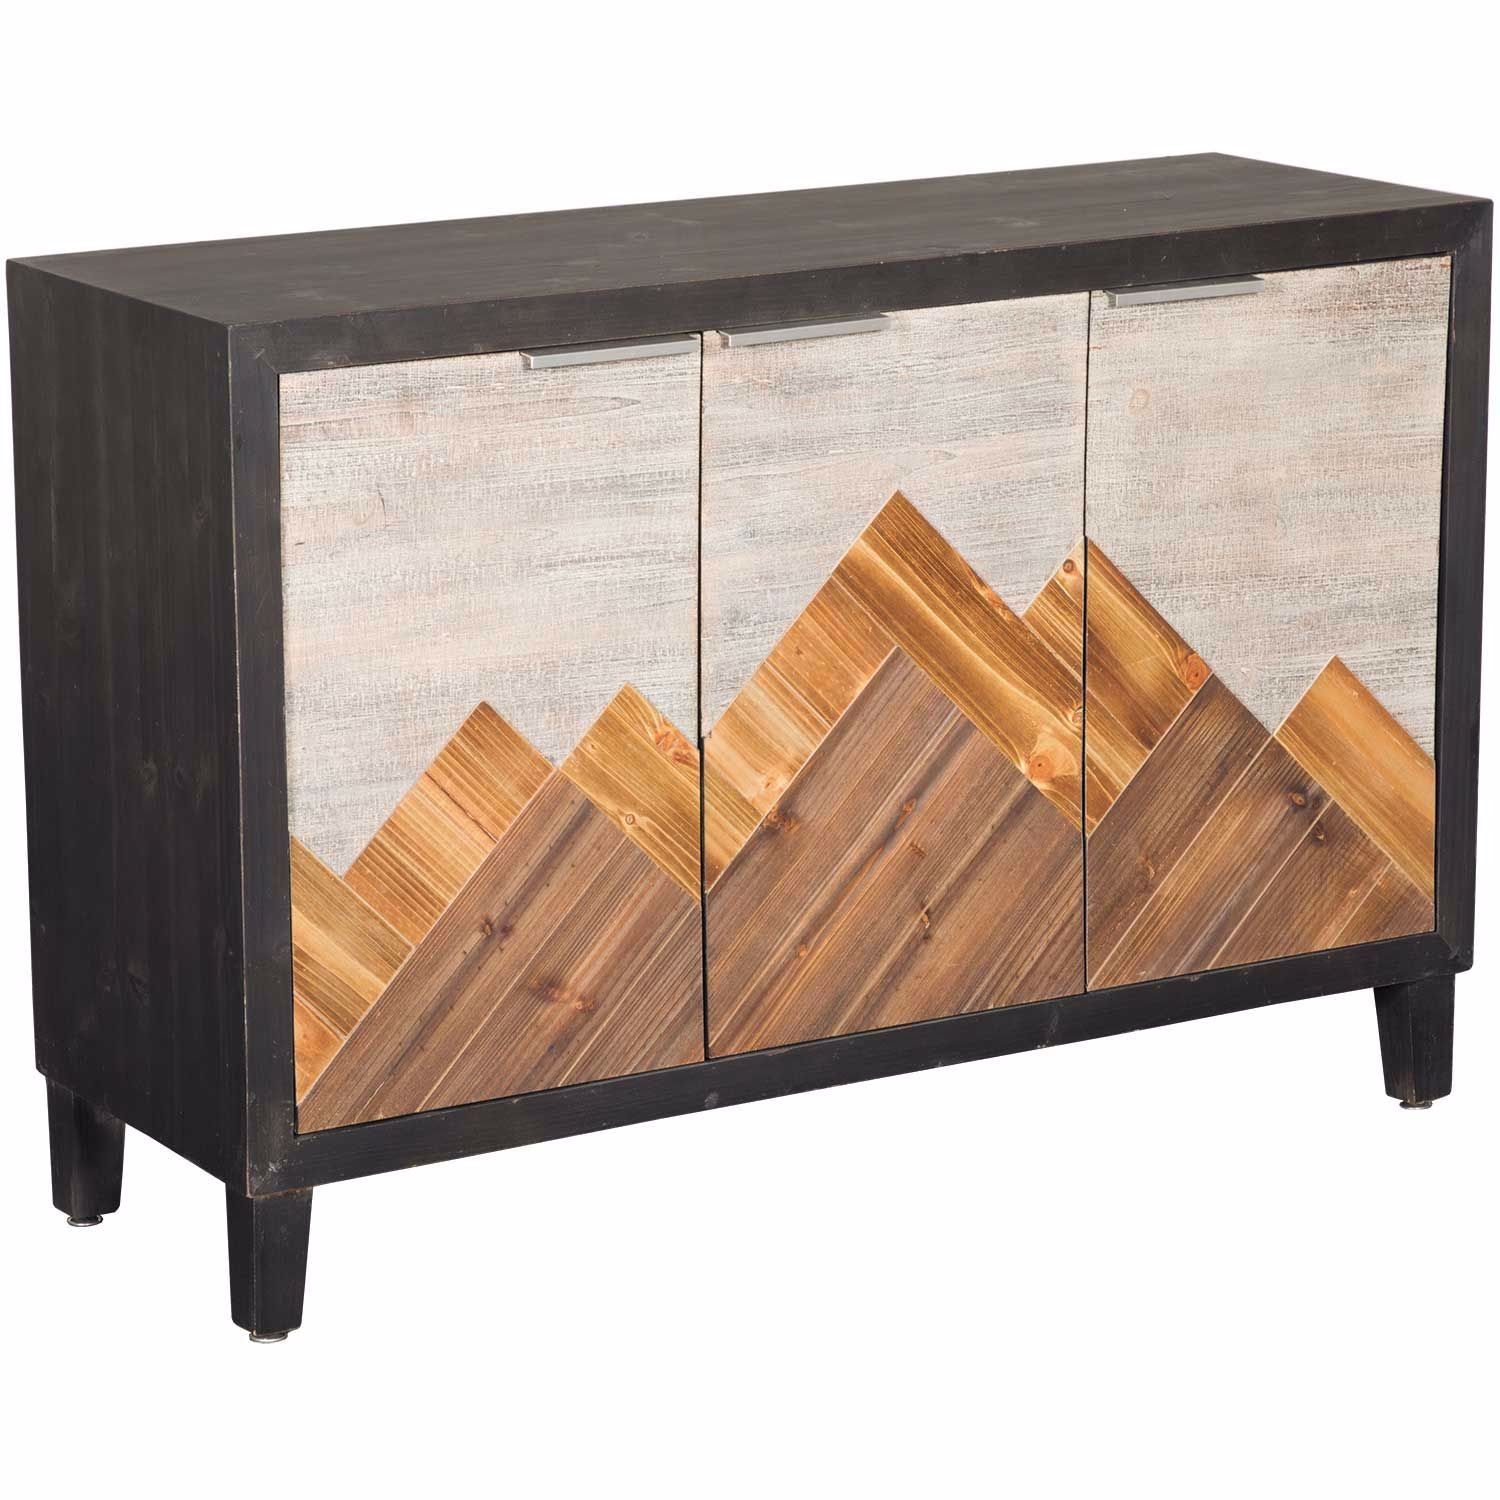 Mountain 3 Door Accent Cabinet | Home Accents | Afw For 2018 3 Door Accent Cabinet Sideboards (View 6 of 15)